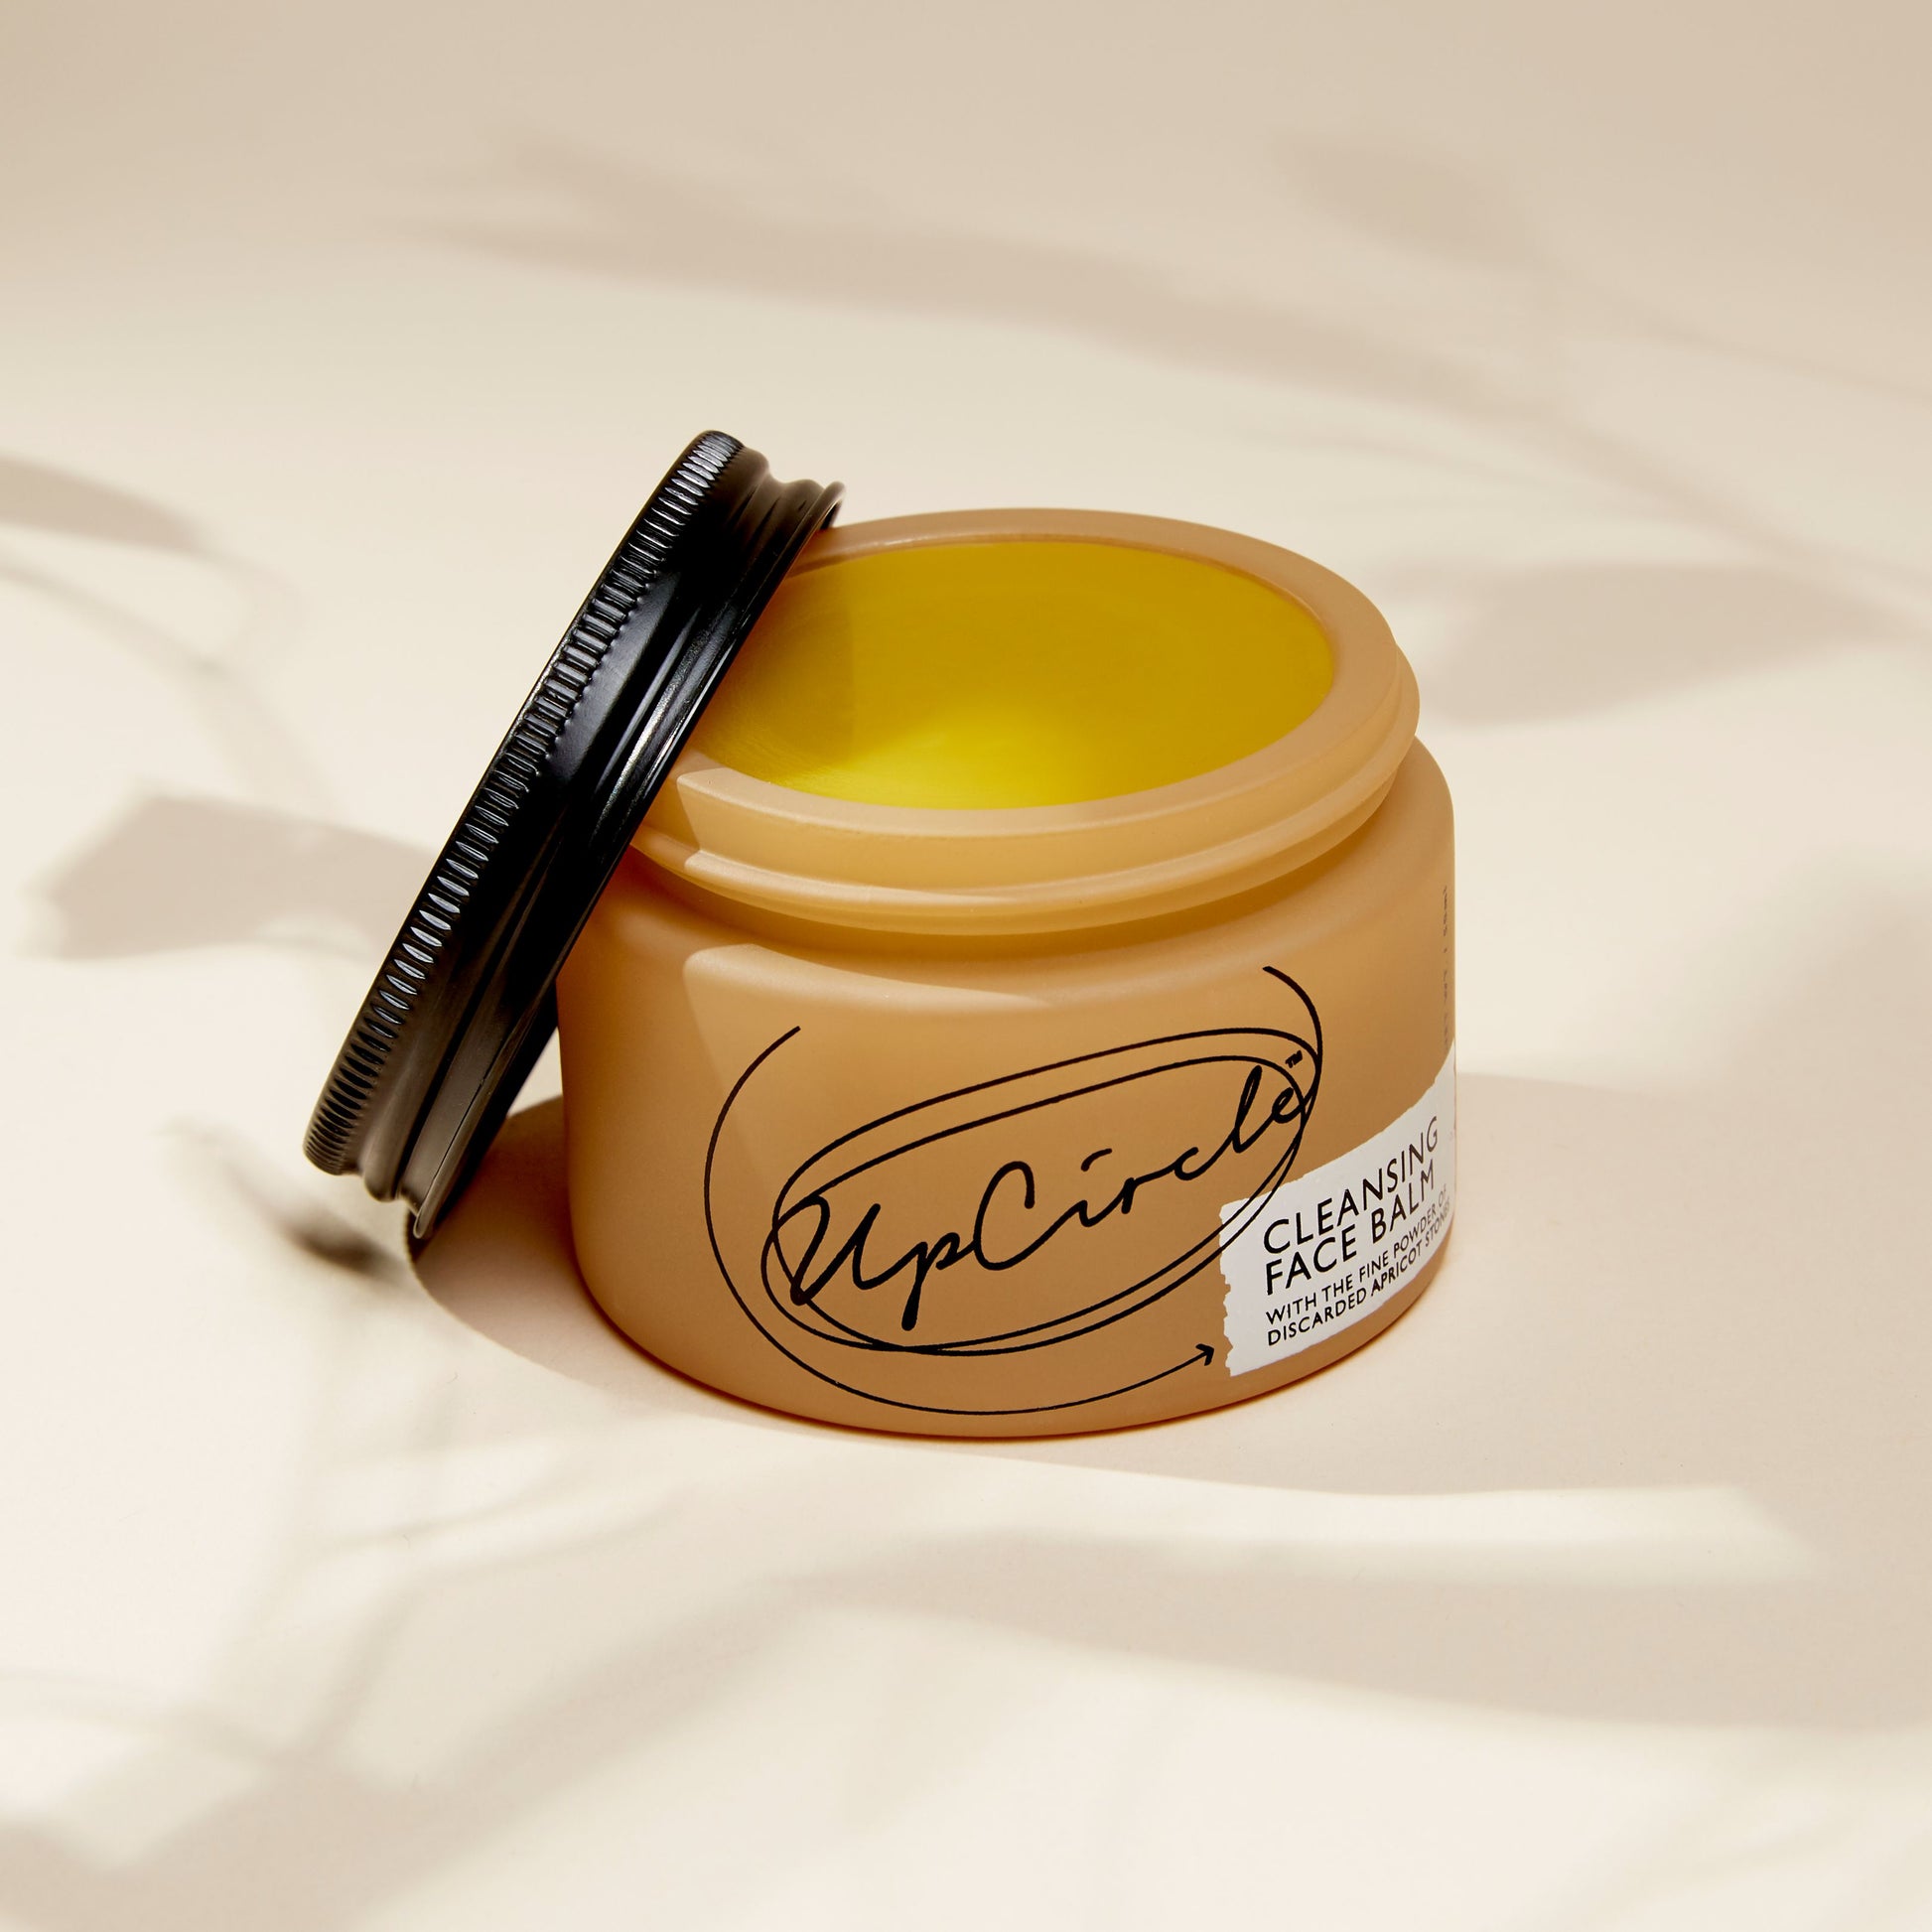 Cleansing balm 